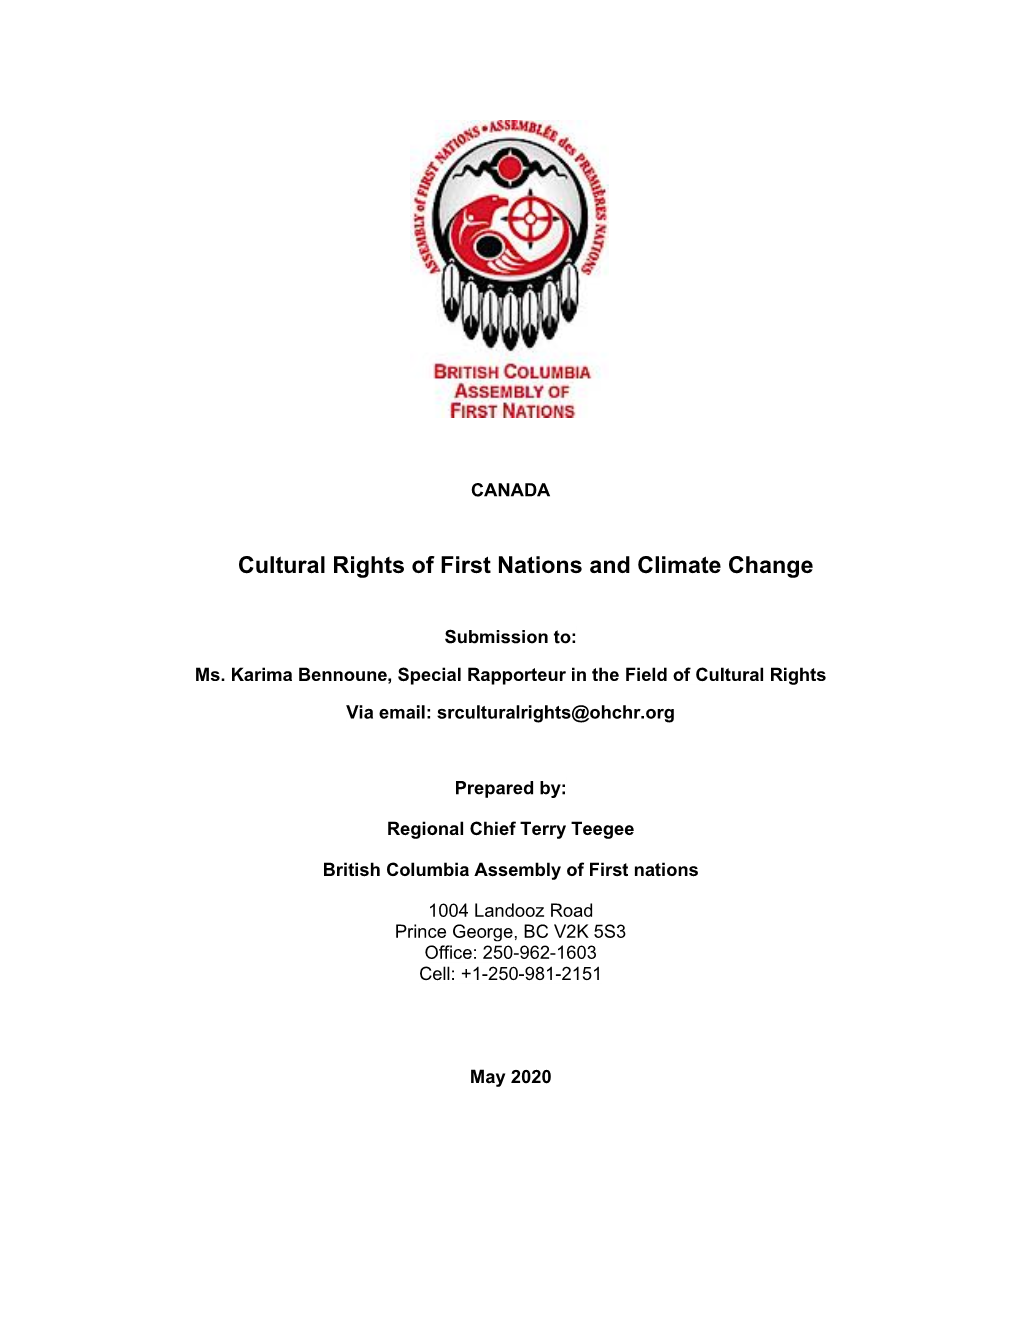 Cultural Rights of First Nations and Climate Change